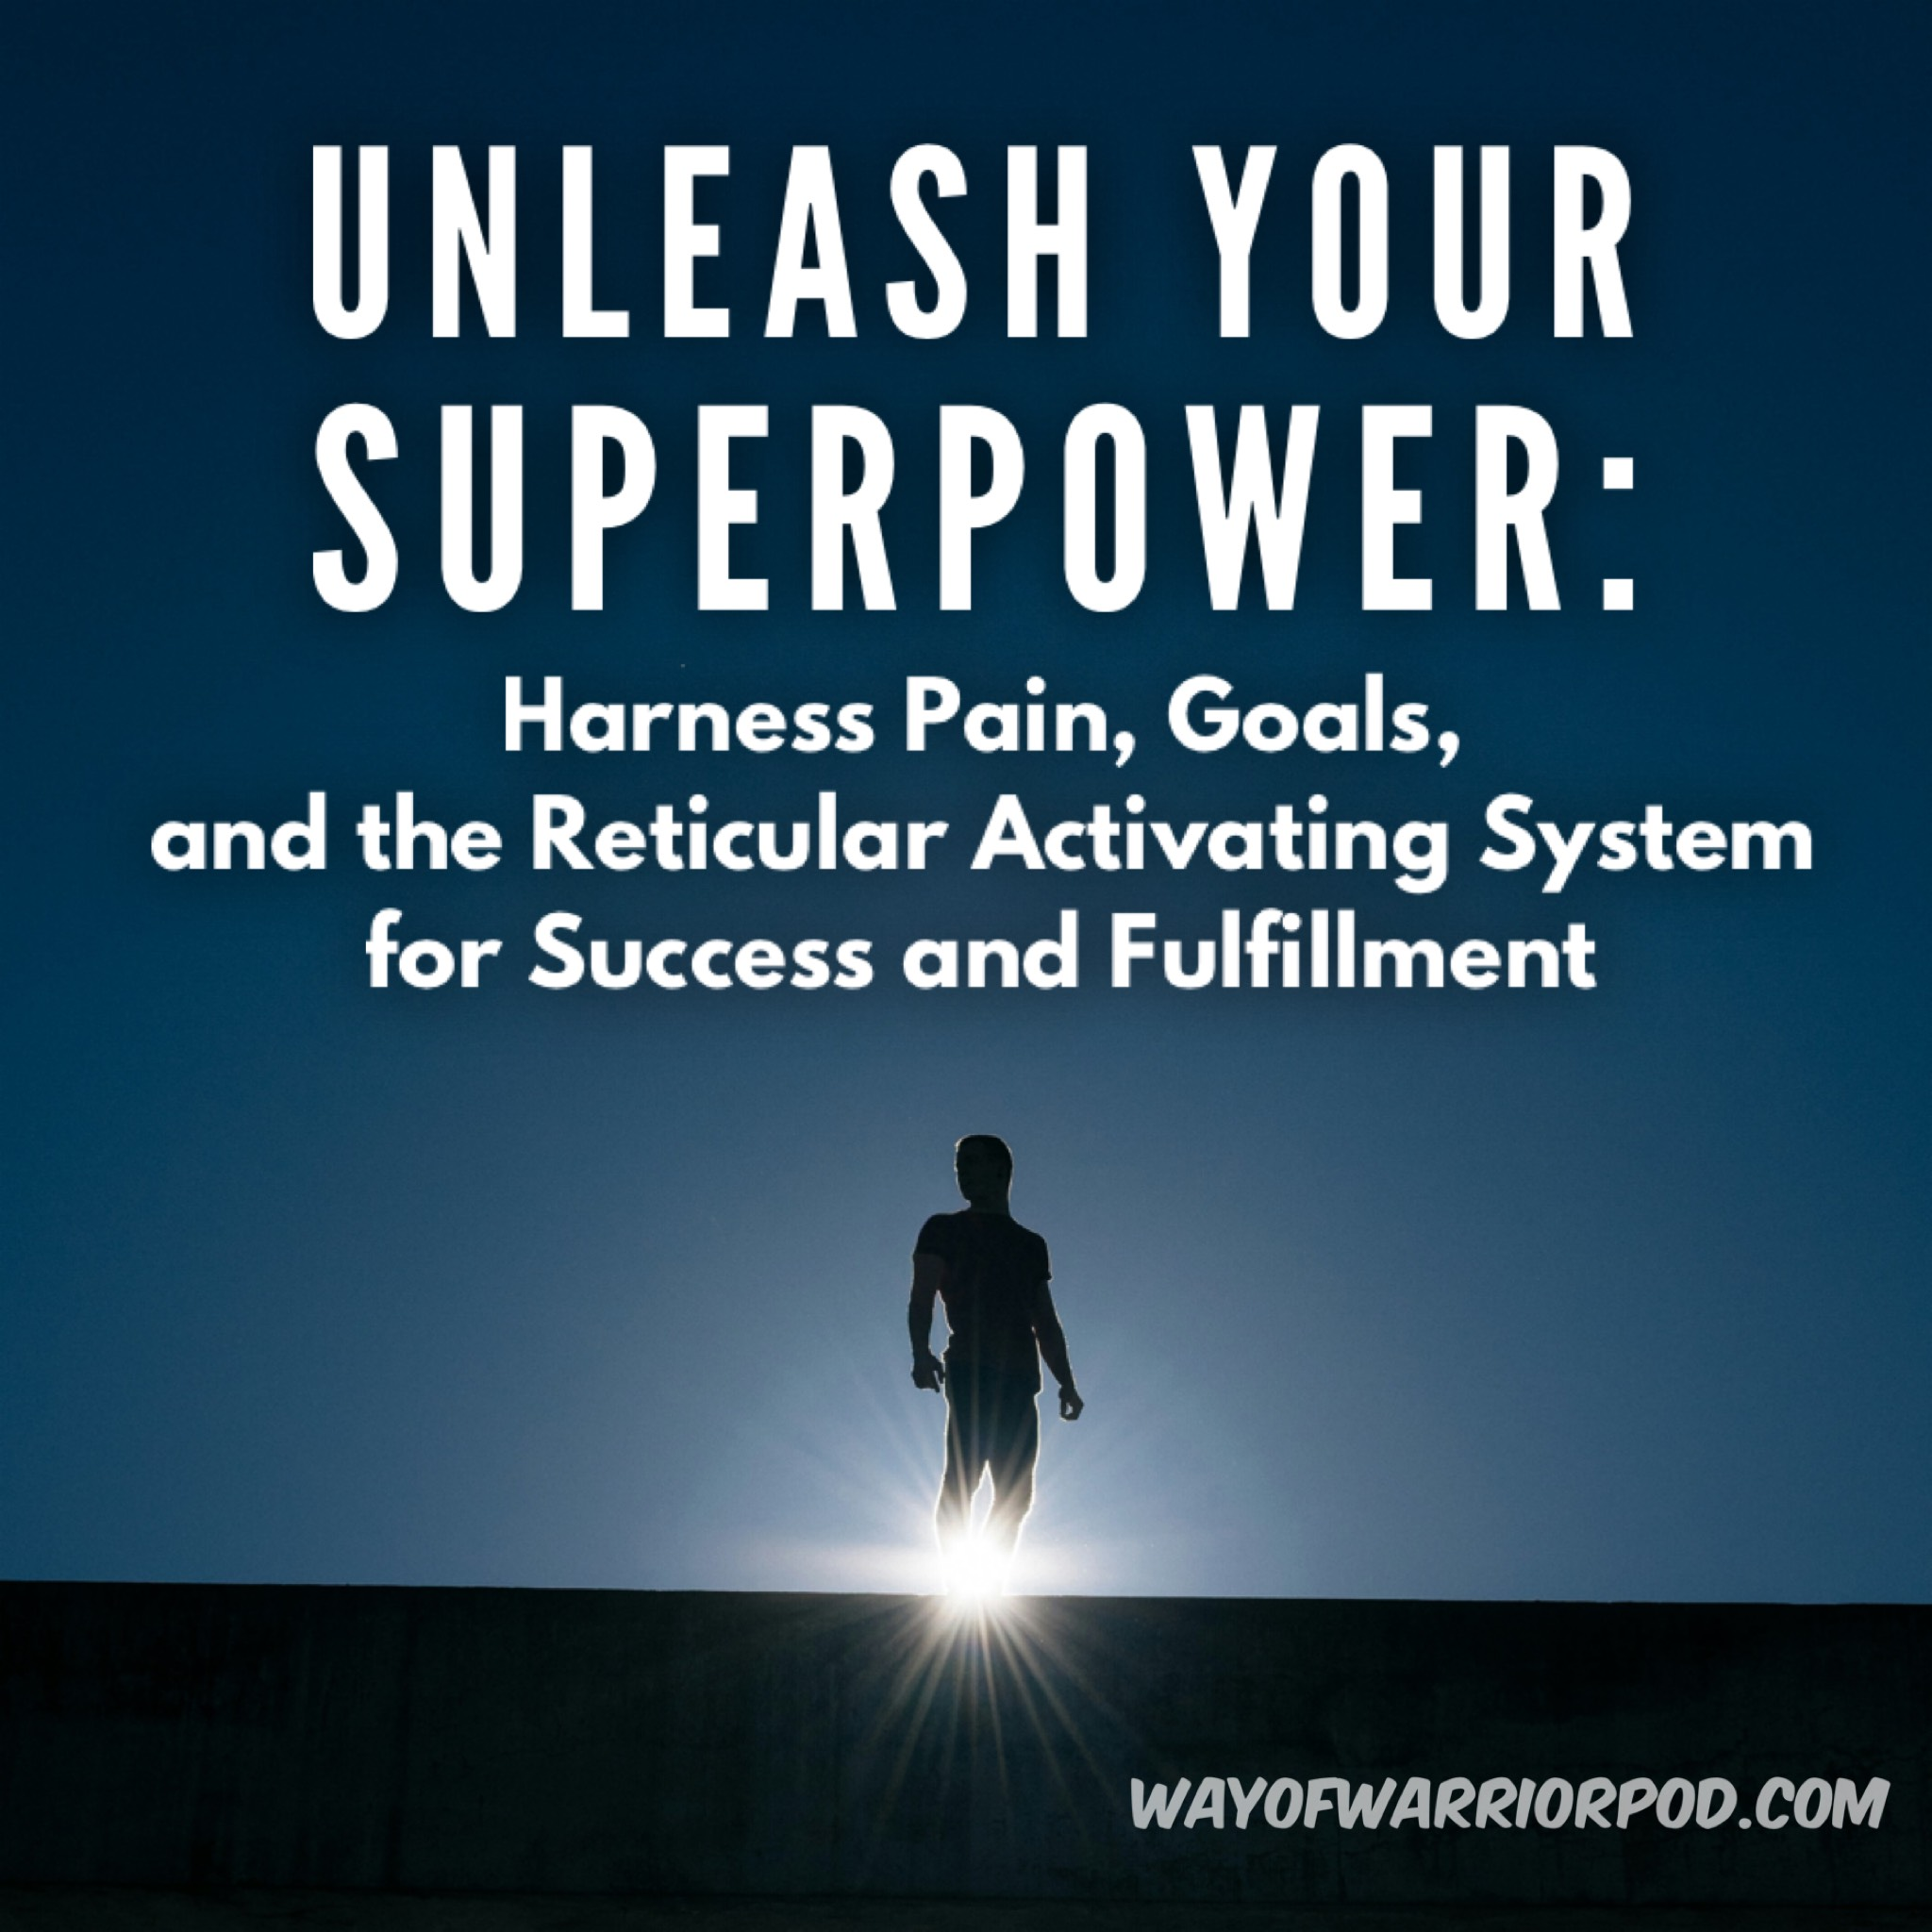 Unleash Your Superpower: Harness Pain, Goals, and the Reticular Activating System for Success and Fulfillment